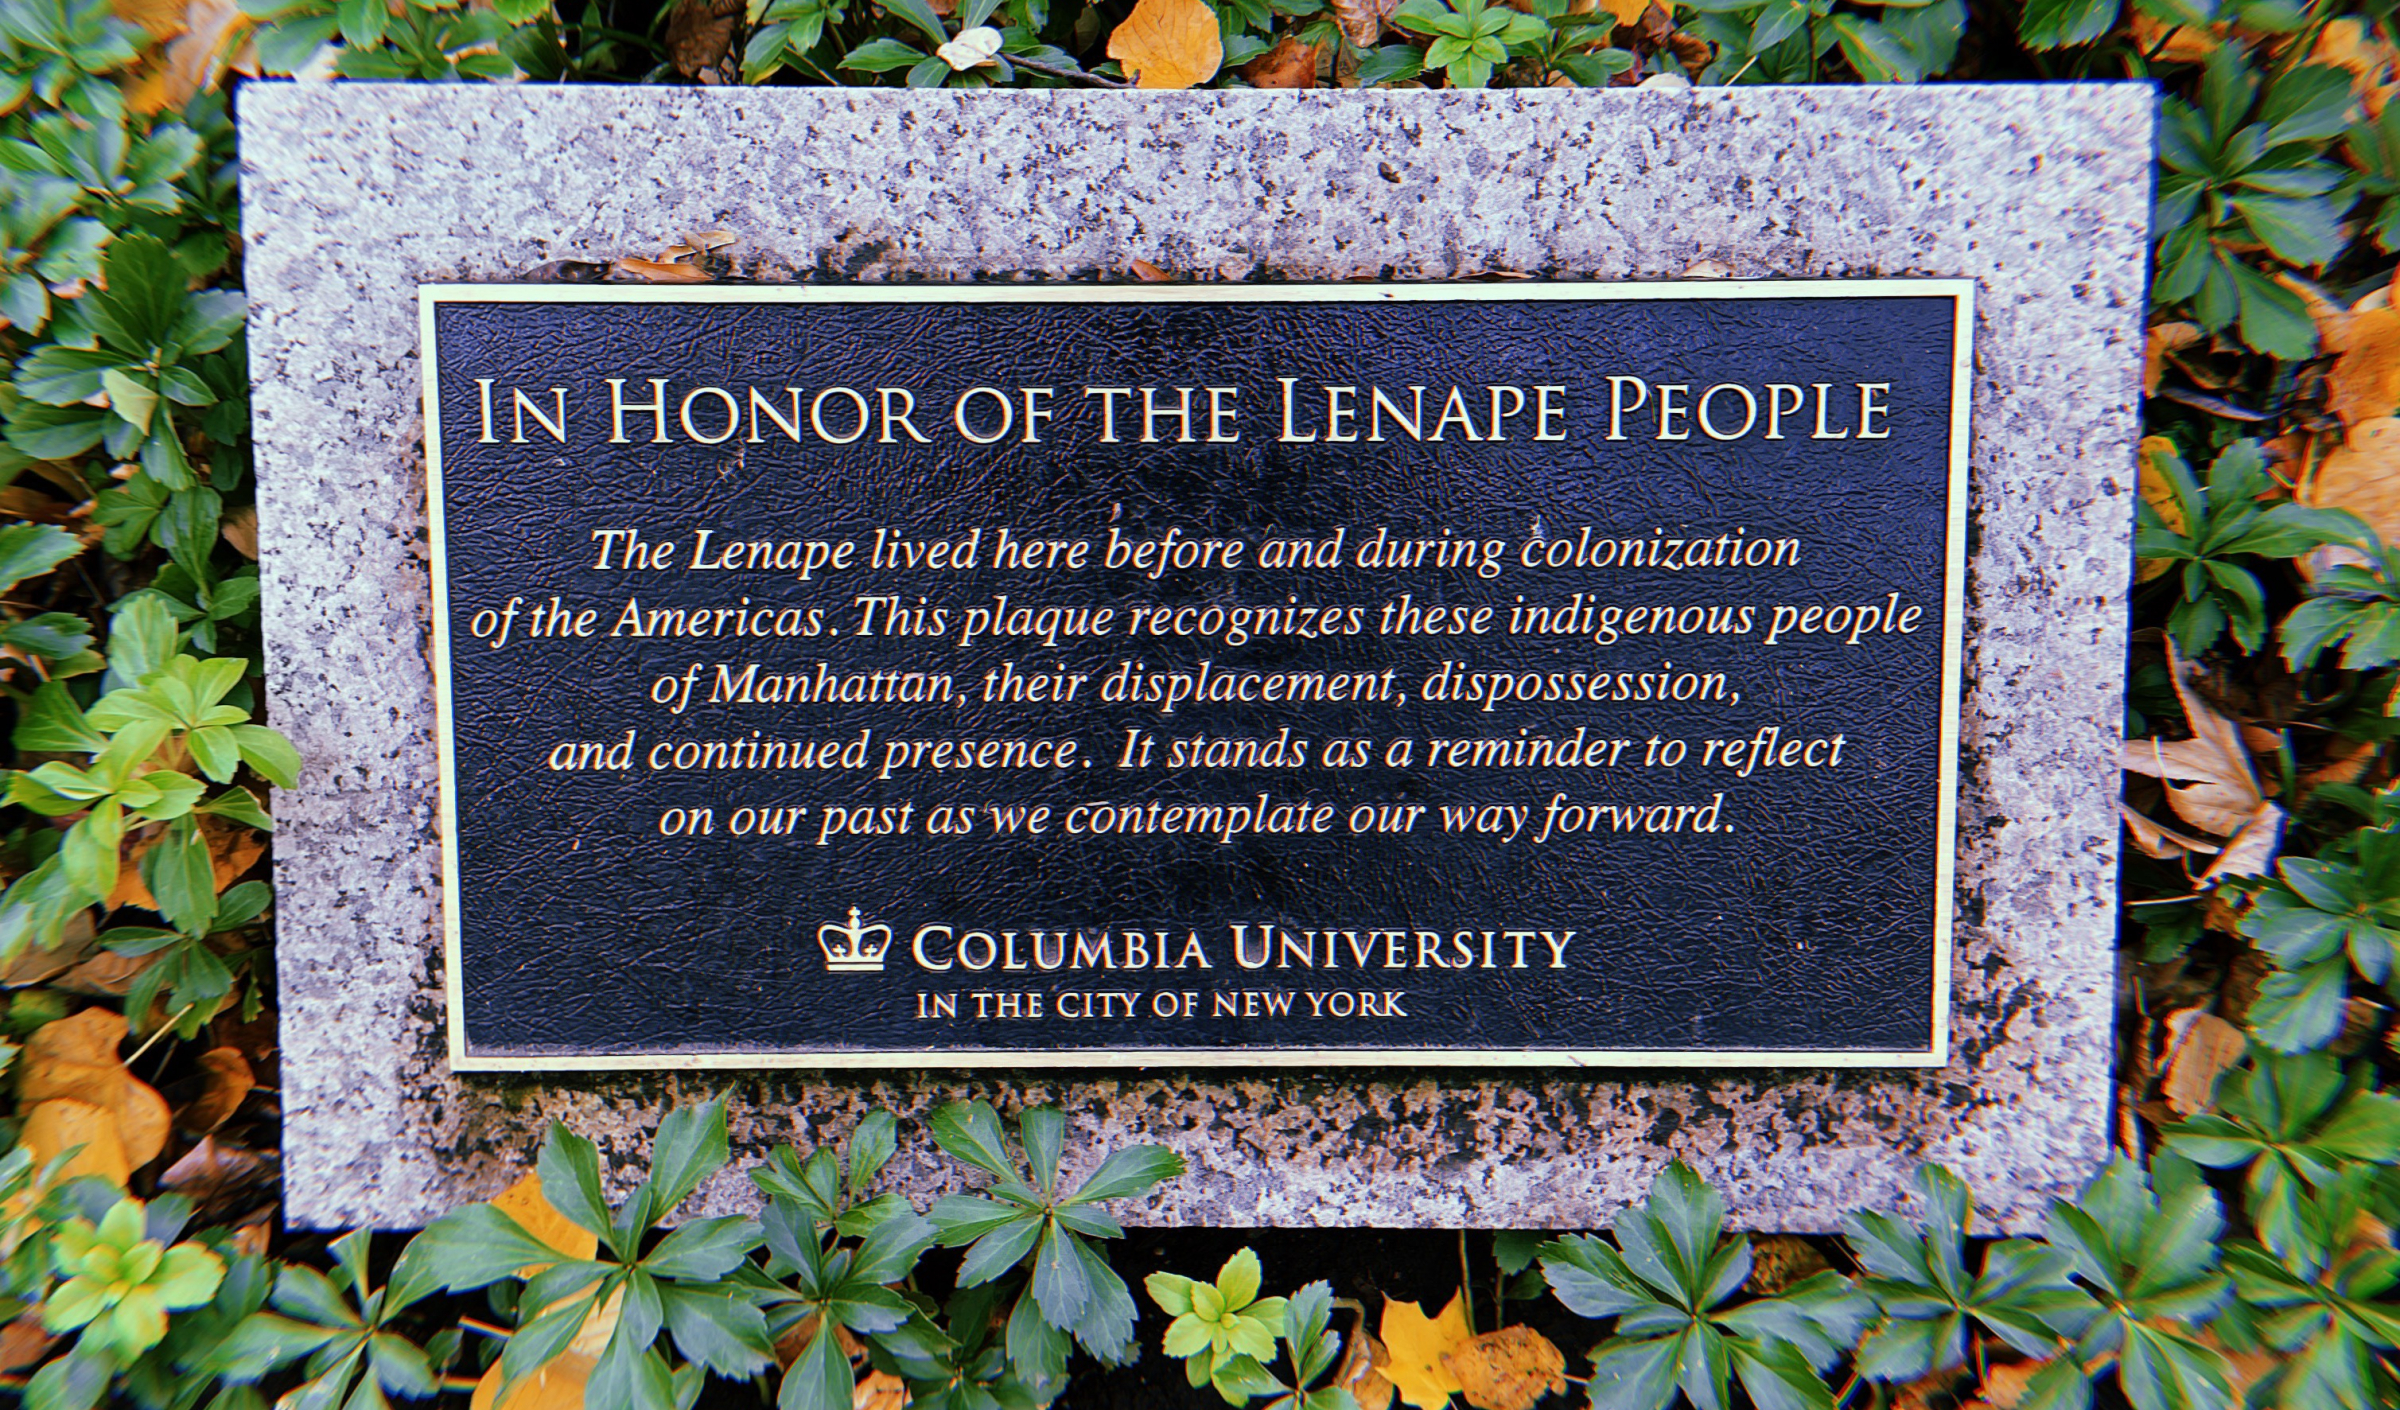 Plaque which reads "In Honor of the Lenape People"